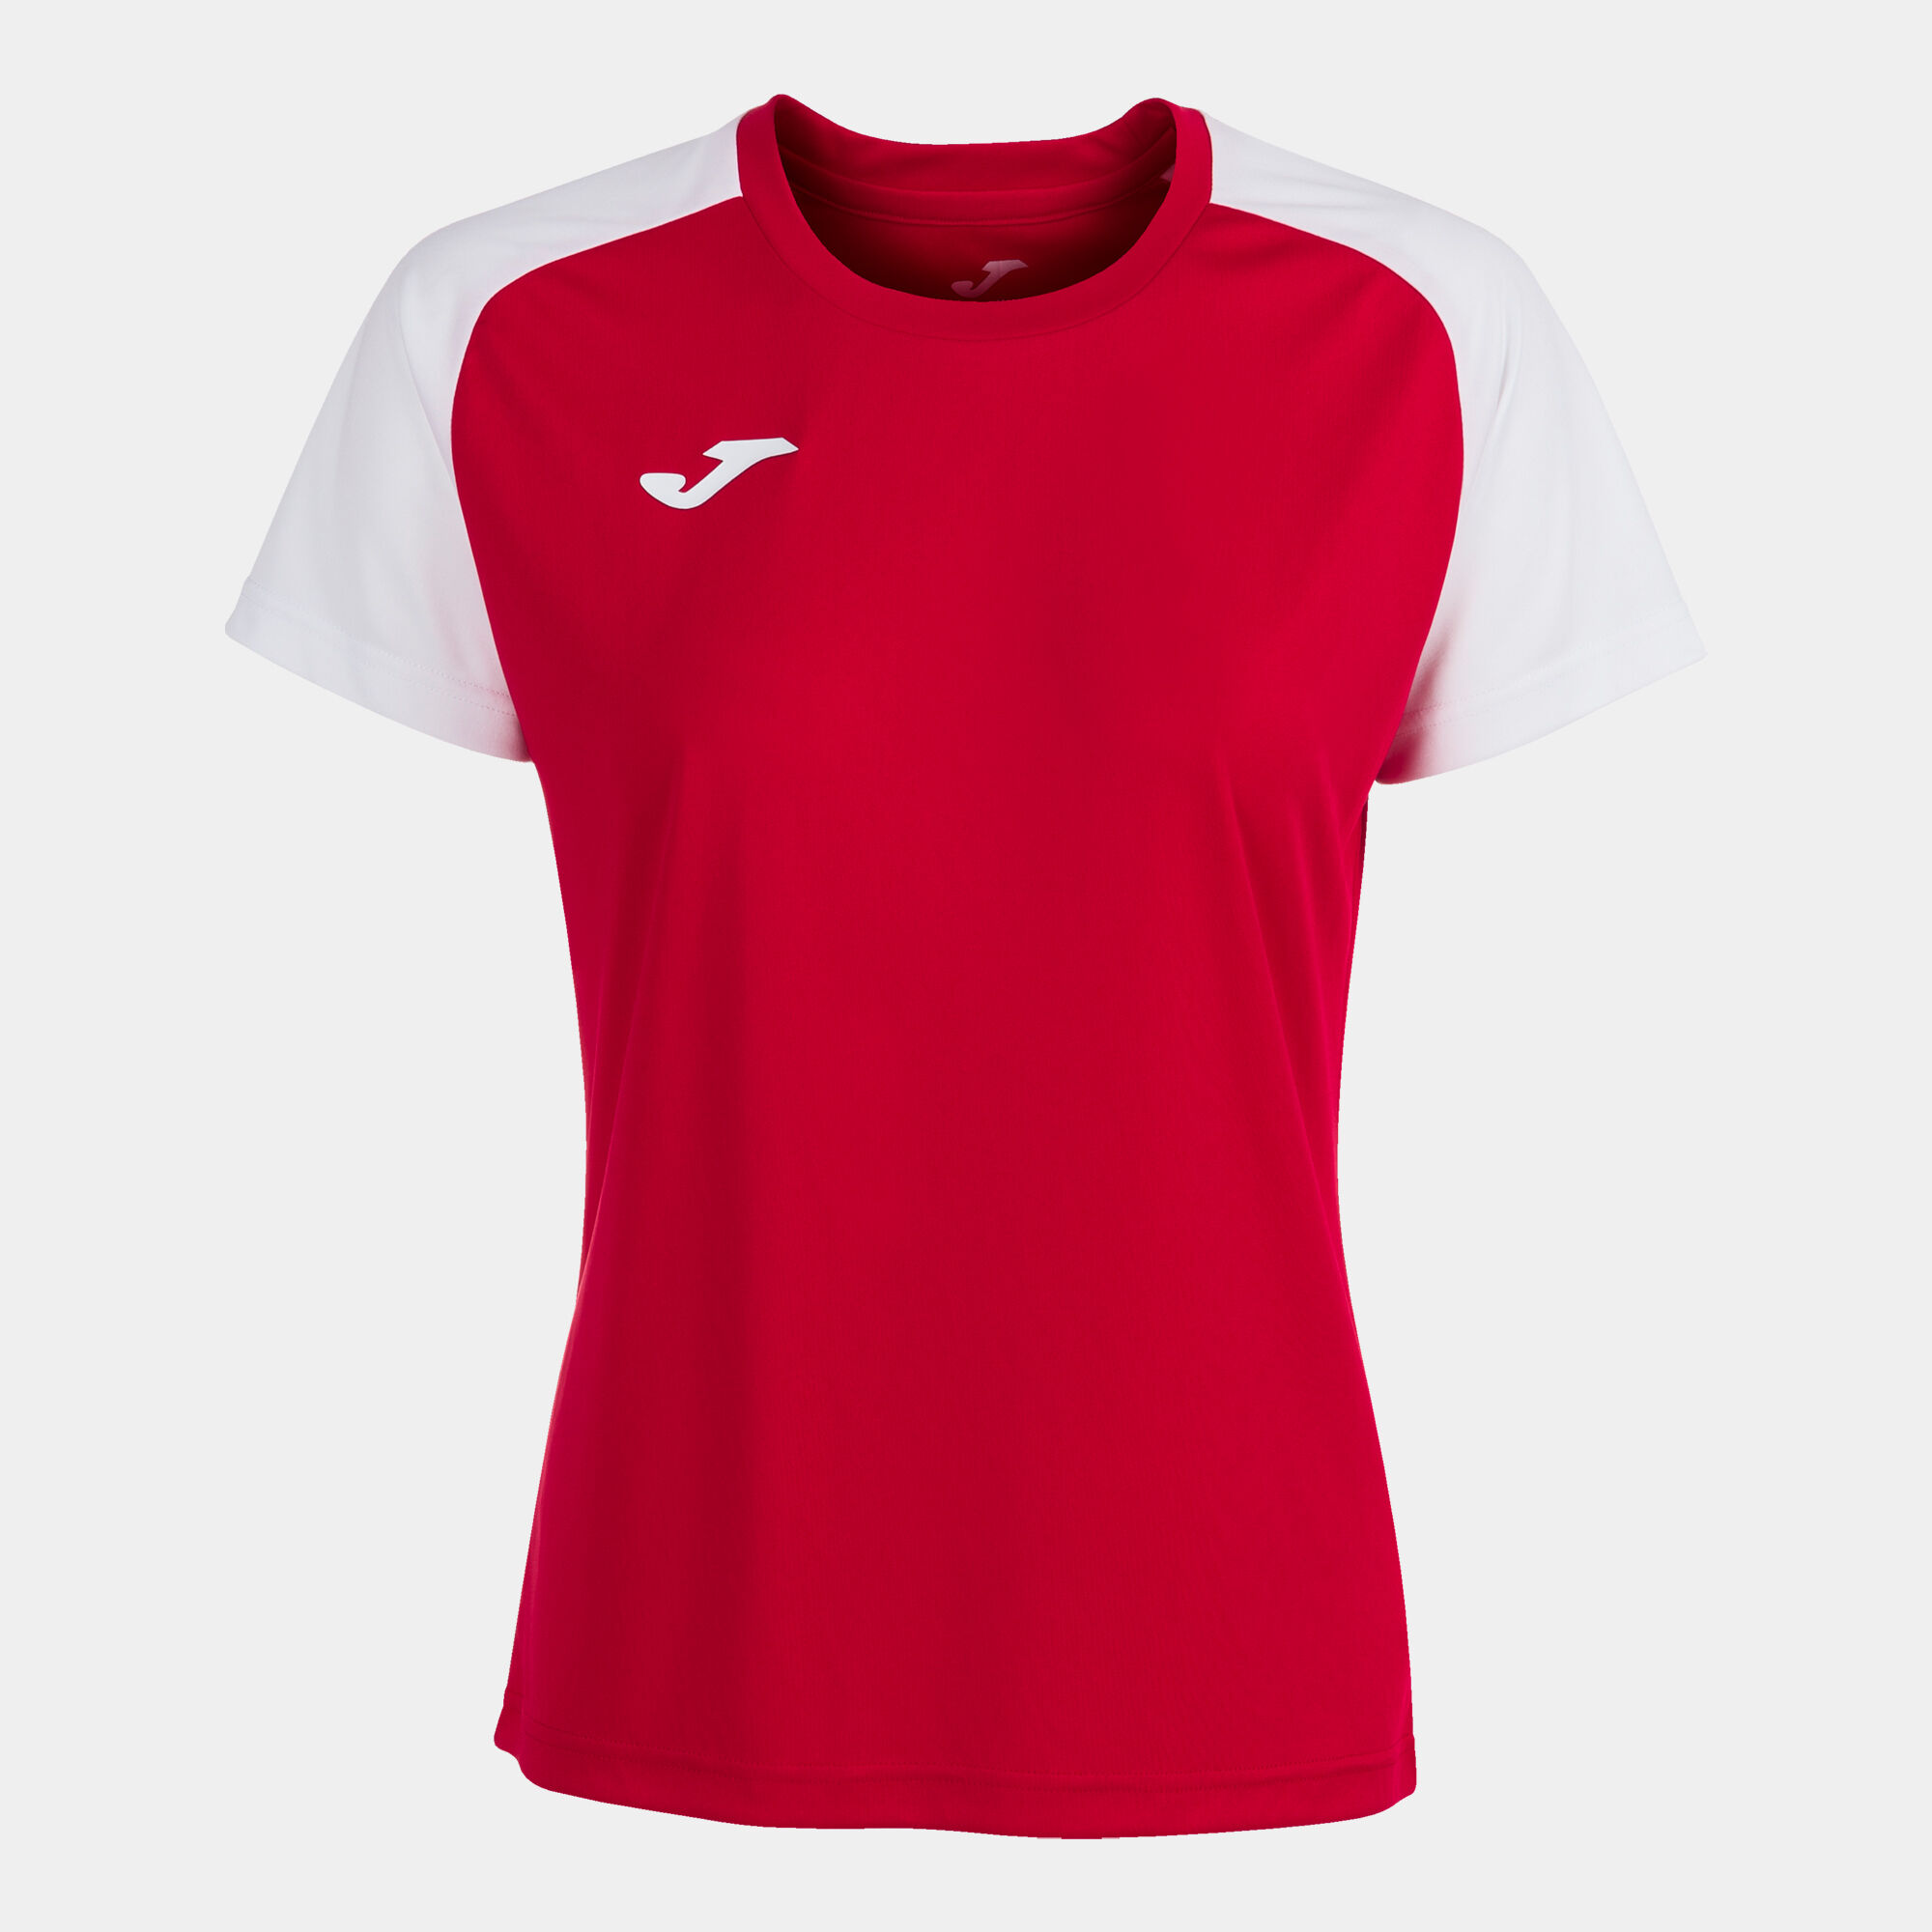 MAILLOT MANCHES COURTES FEMME ACADEMY IV ROUGE BLANC